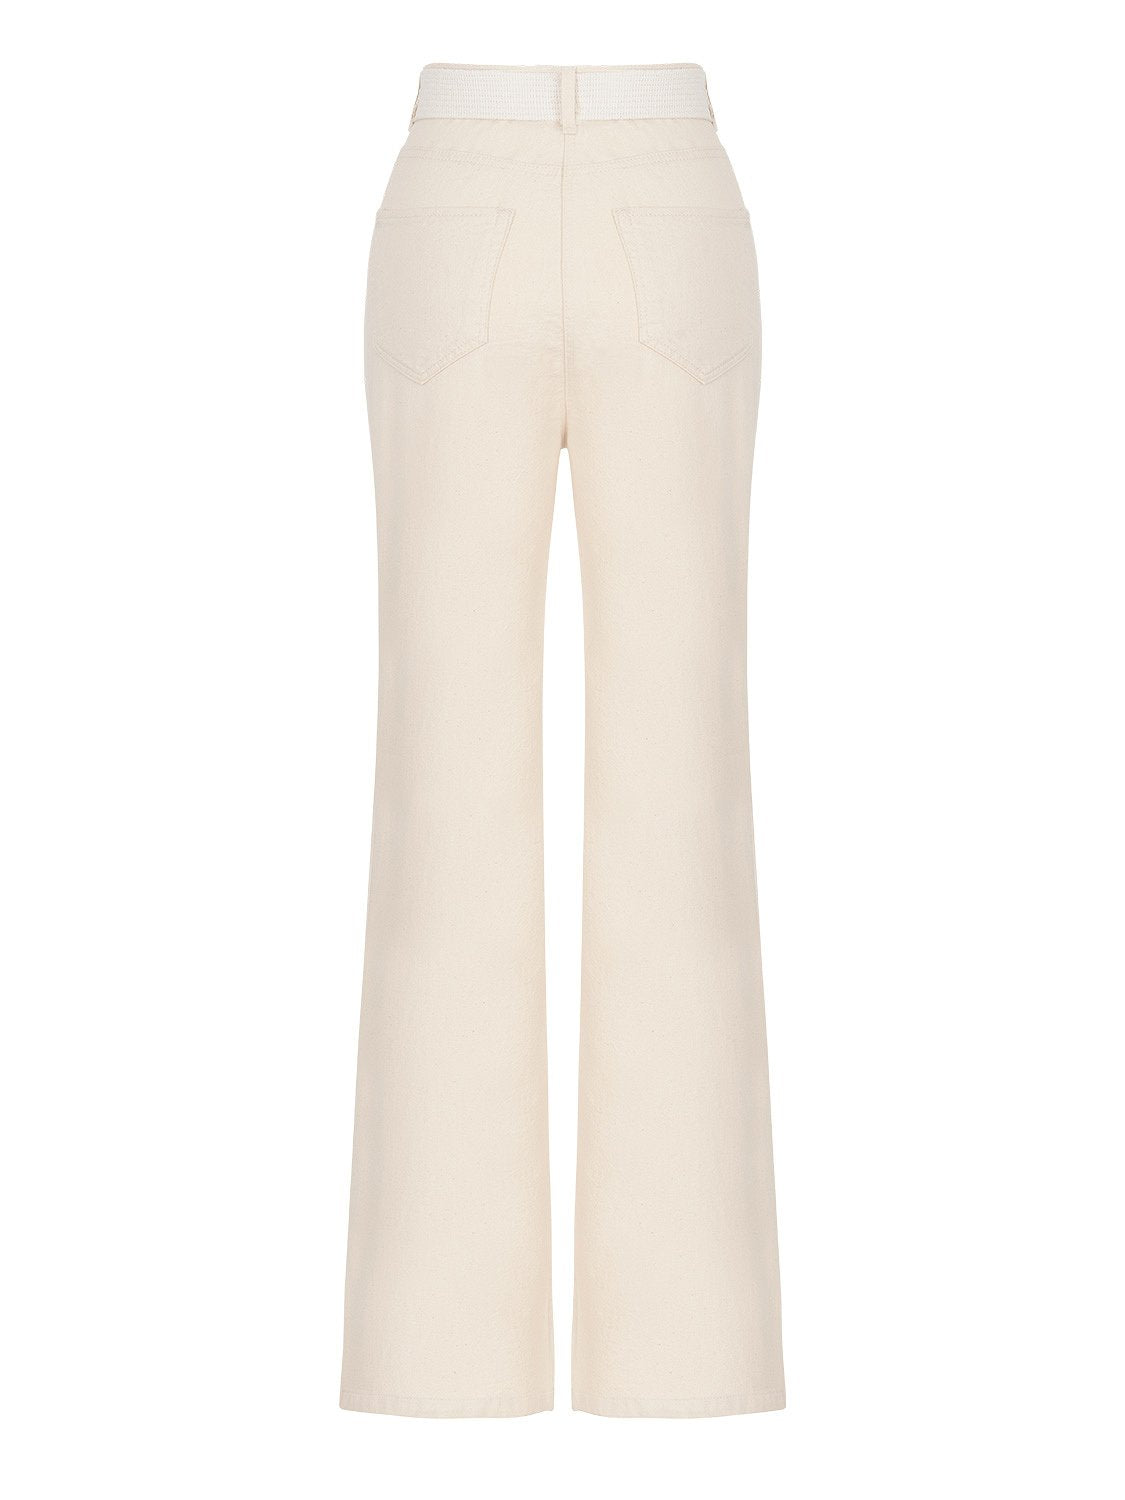 Flared Beige Jeans